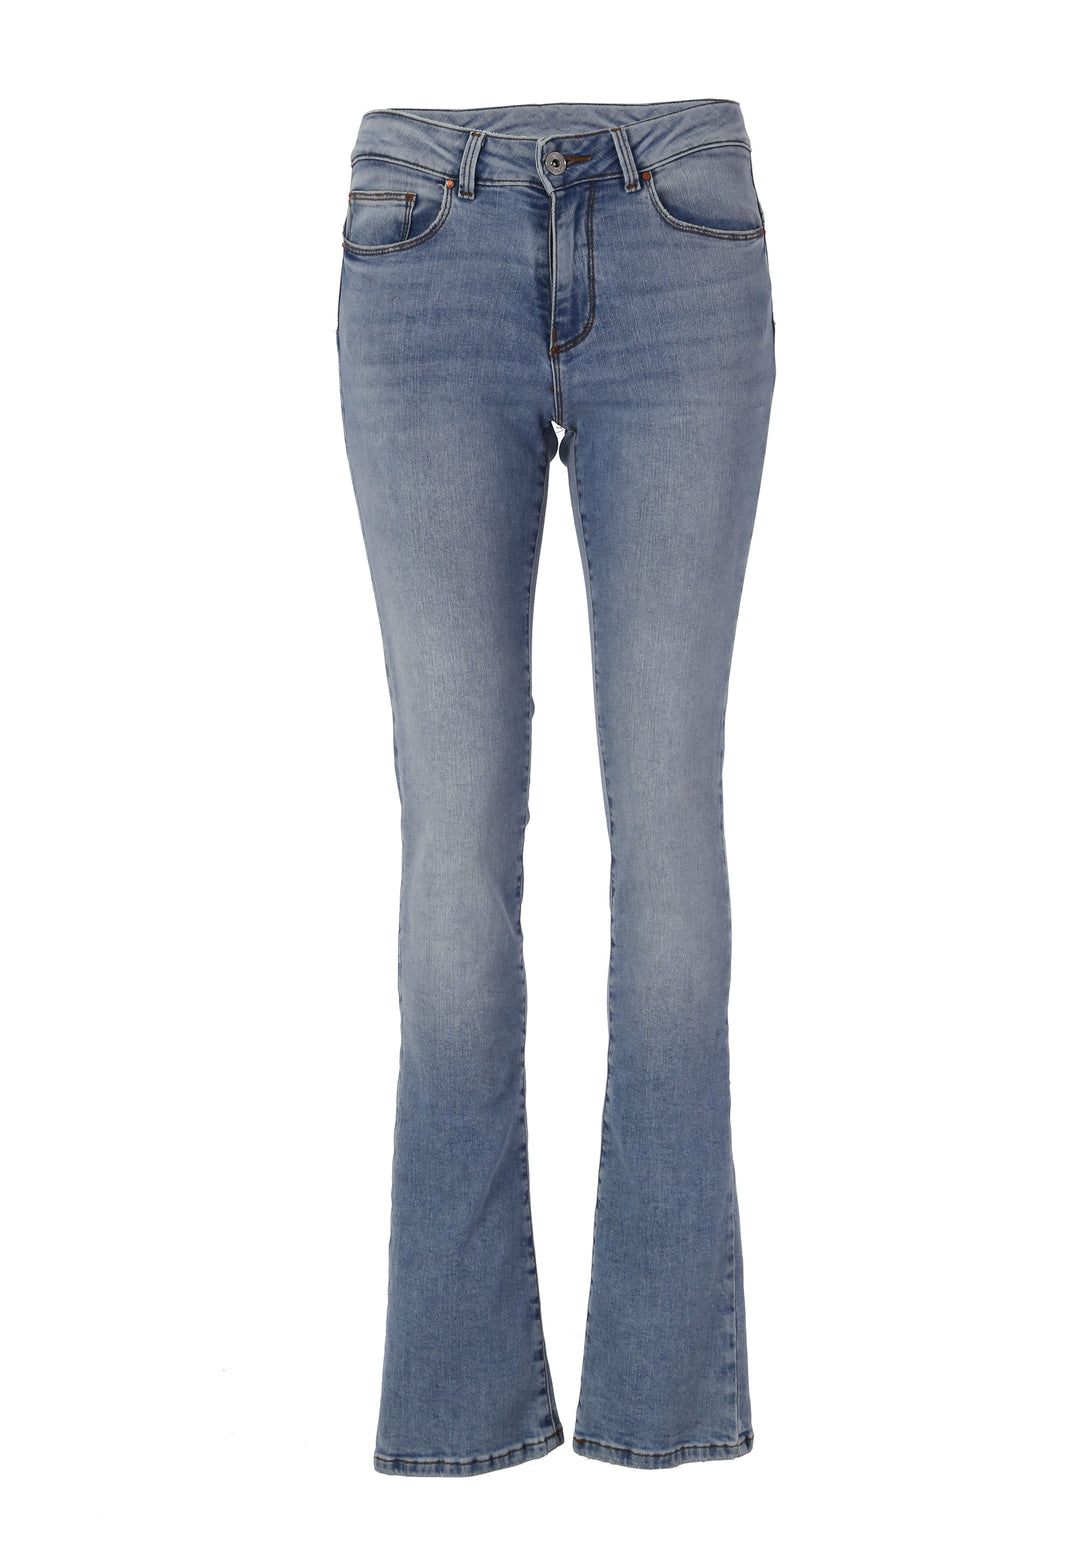 Jeans bootcut made in denim with bleached middle wash Fracomina FP24SV8020D40103-062-1